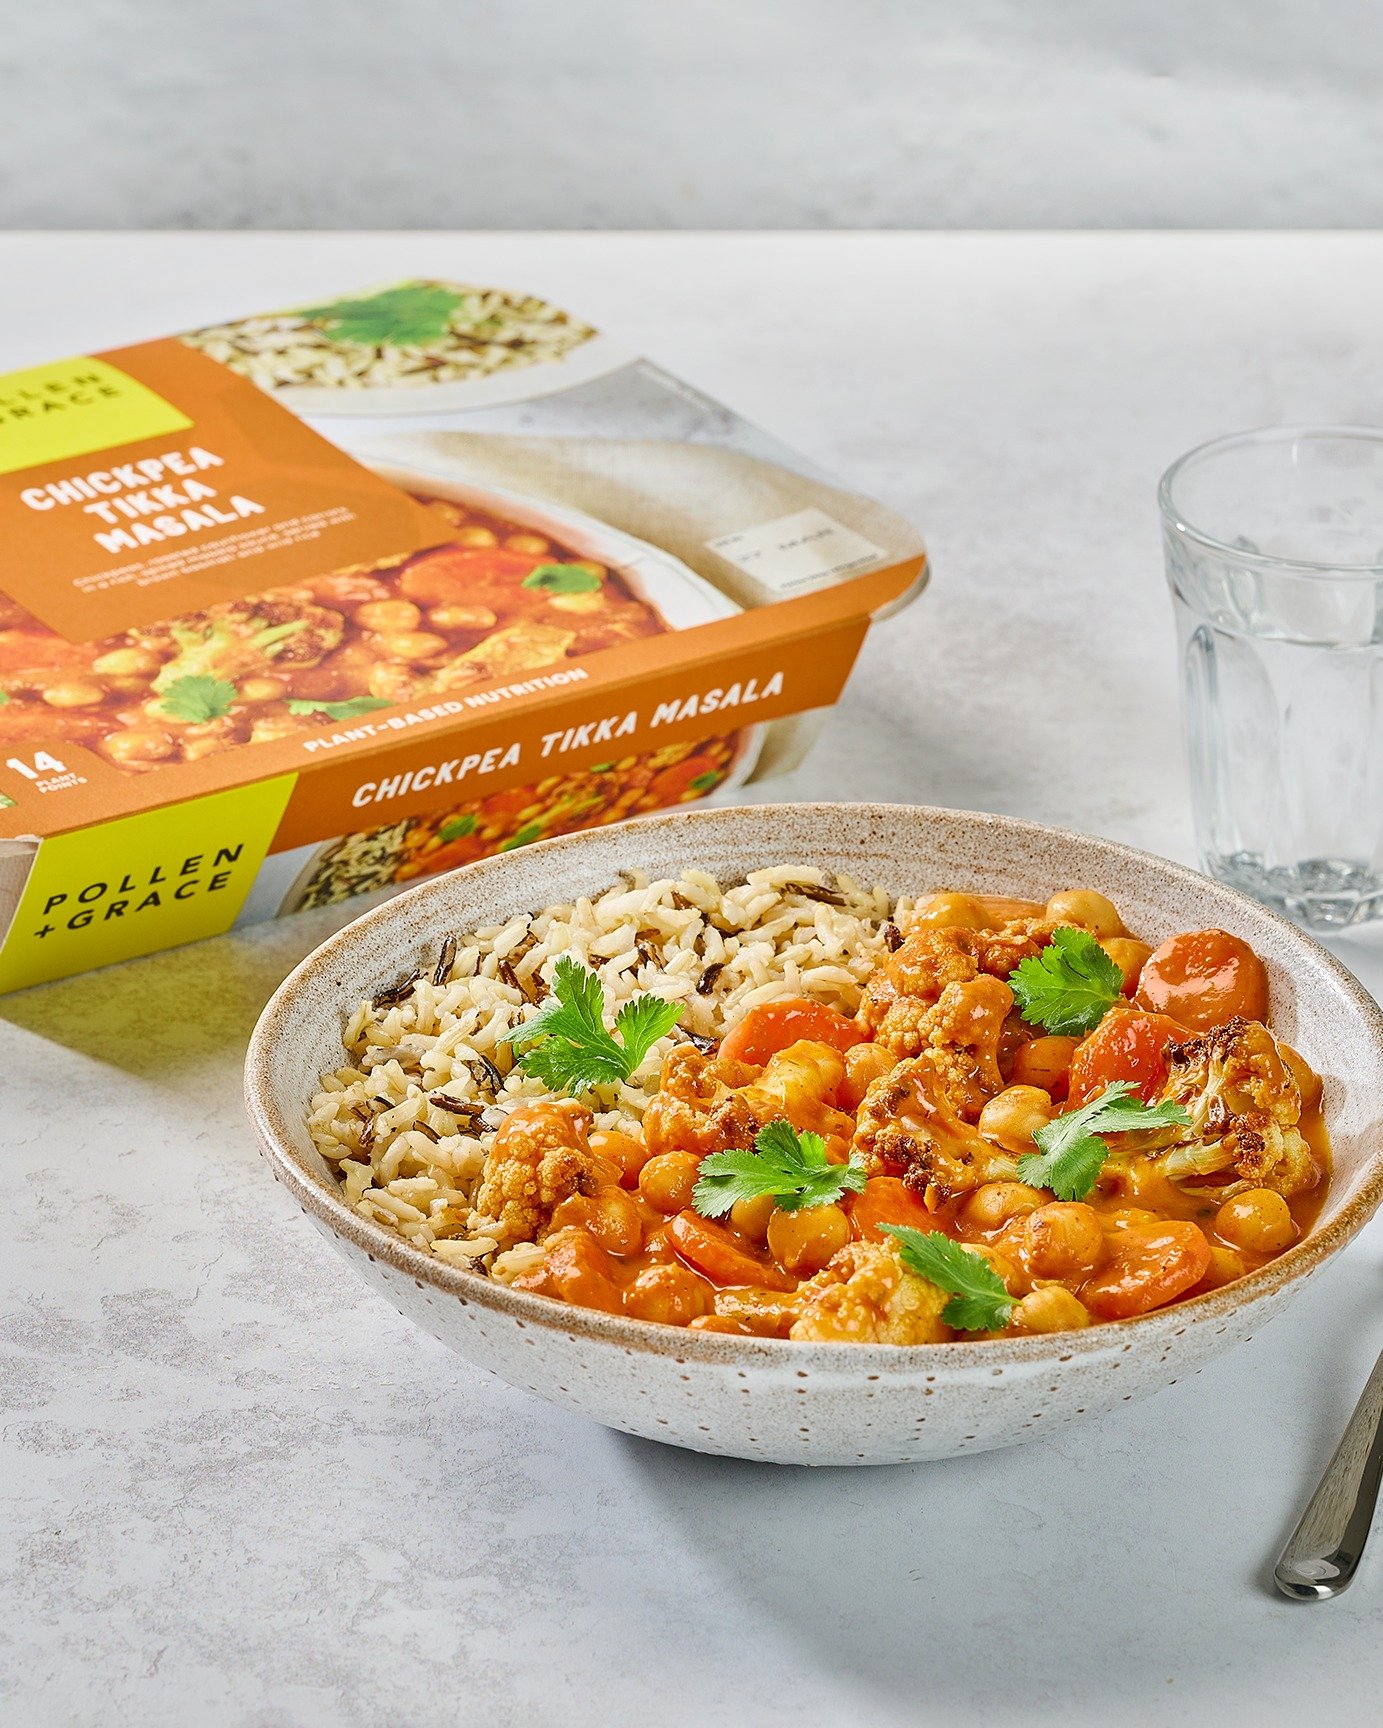 An easy evening meal that's packed full of natural nutrition 💪

✔️ 14 plant points
✔️ 55% of your recommended fibre for the day
✔️ 14g of protein
✔️ Plant-based
✔️ Gluten free

Find it in your local @waitrose 😍
#pollenandgrace #readymeal #healthyre